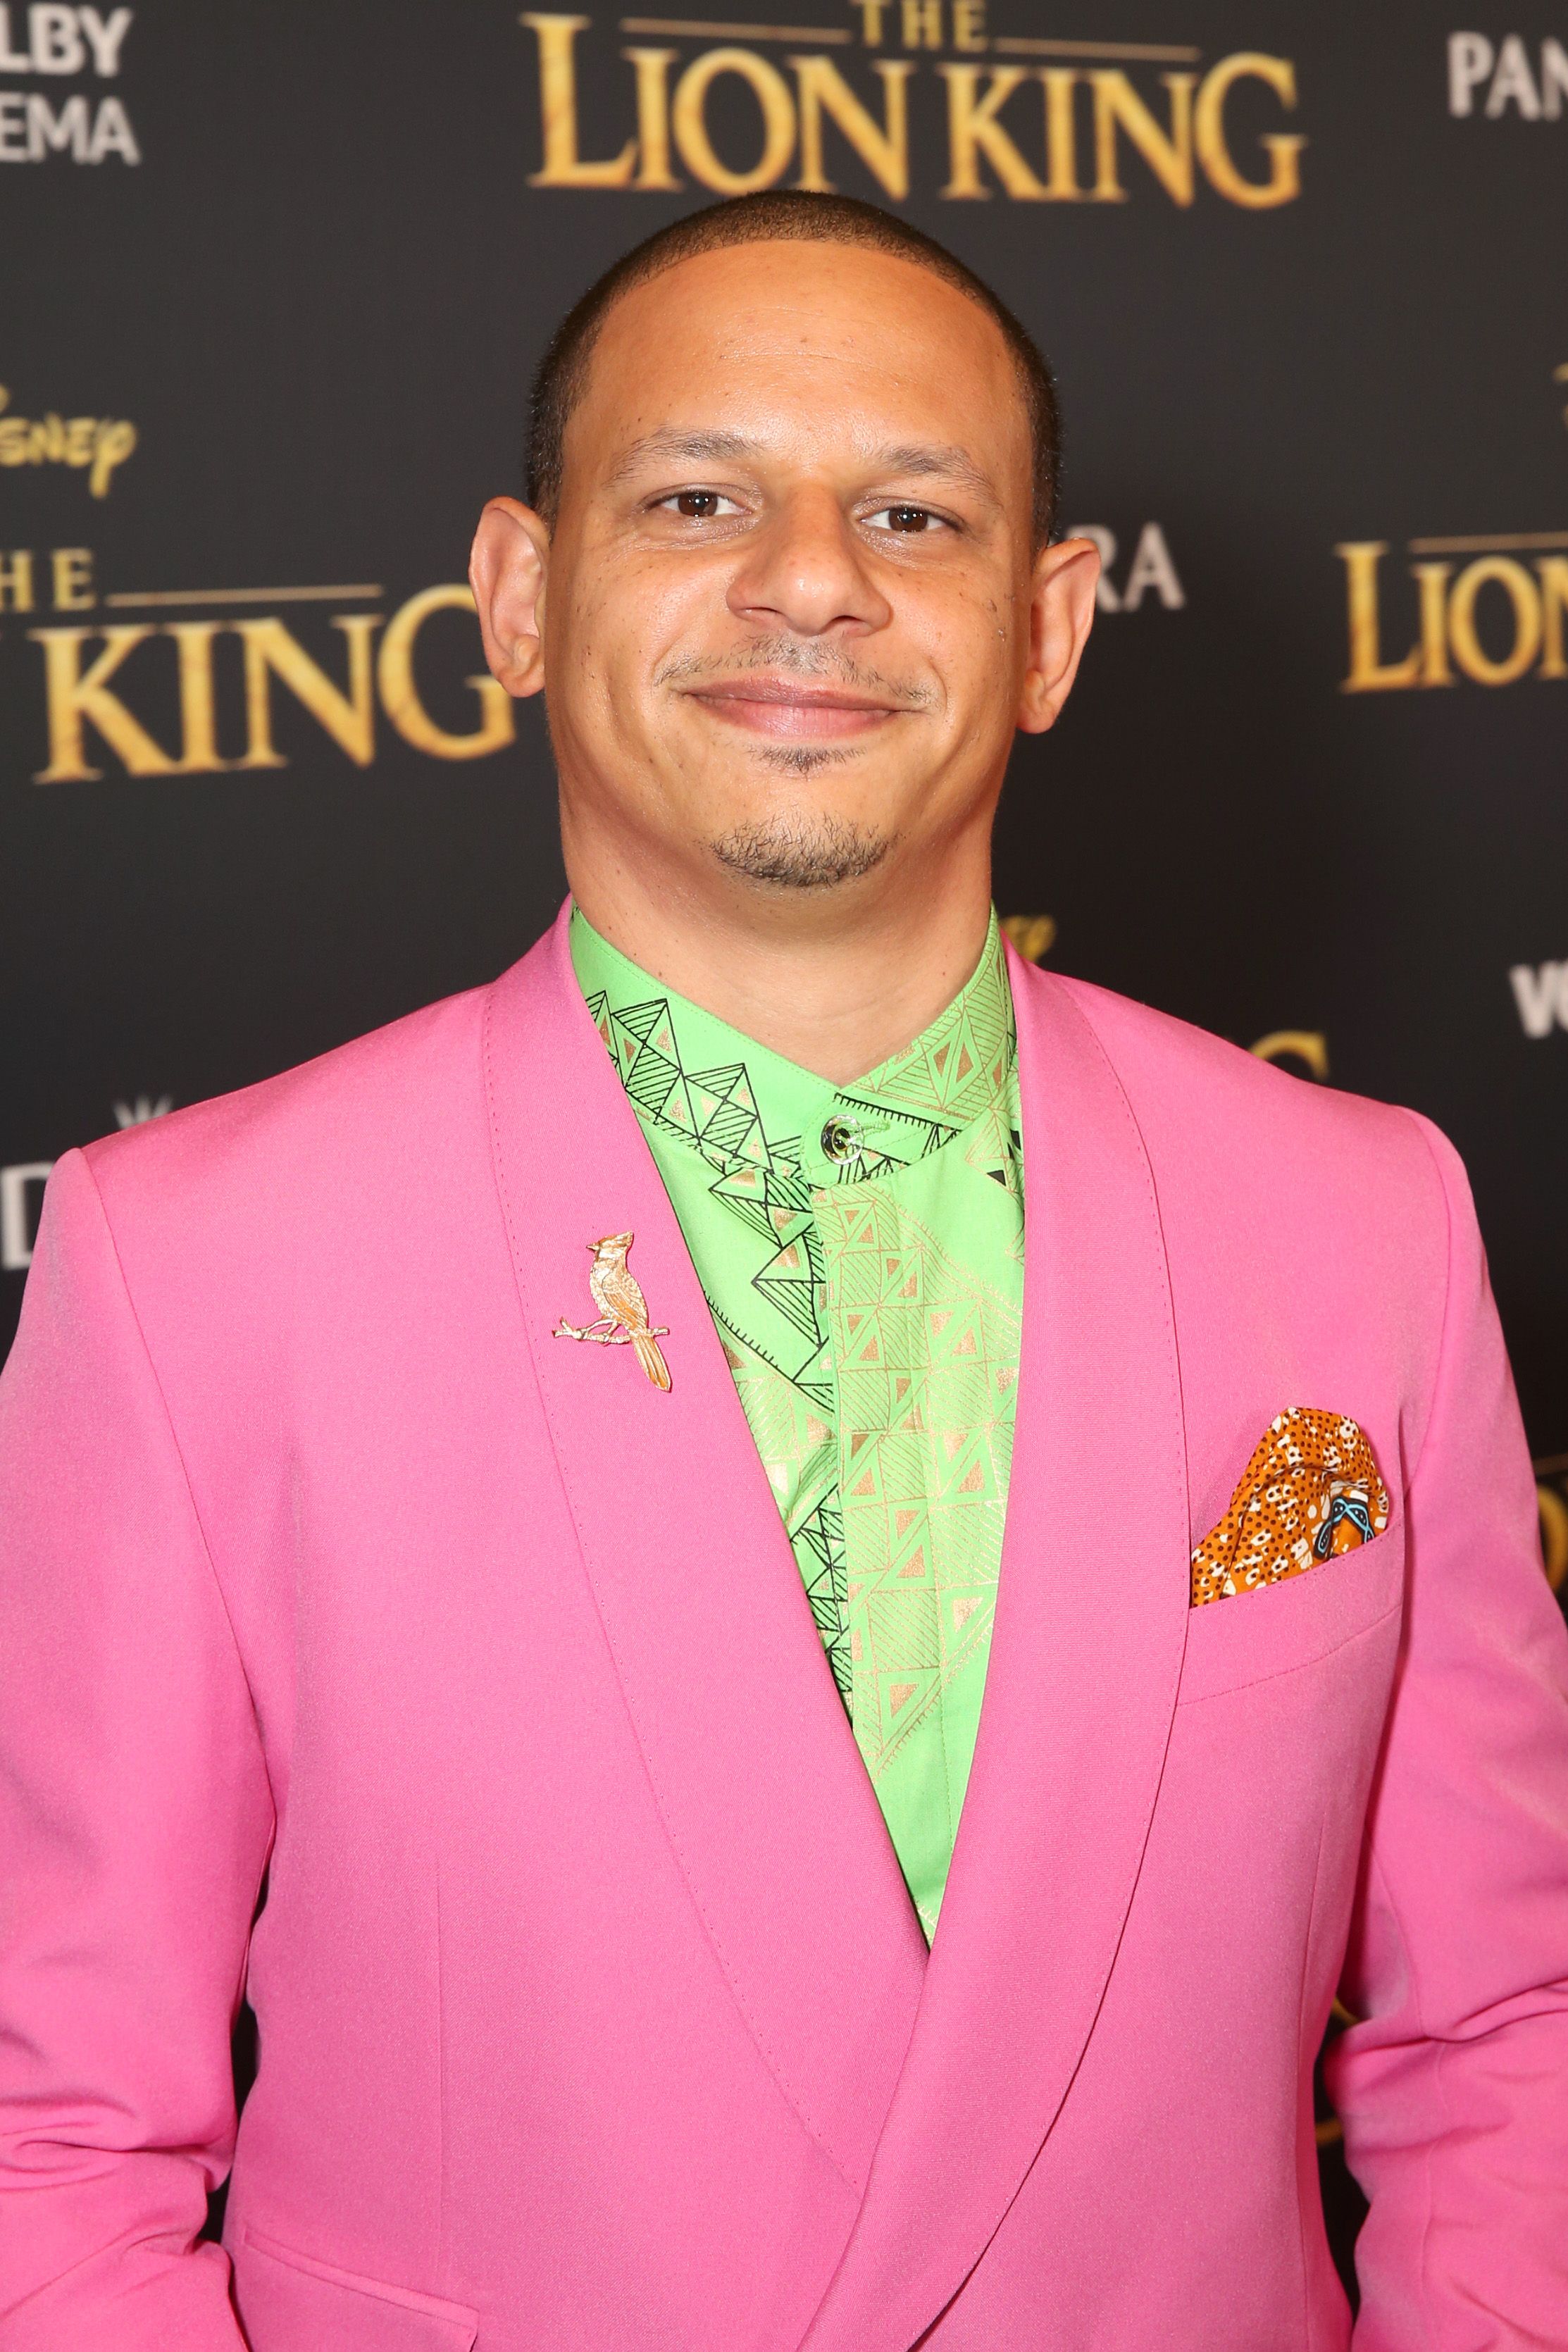 Eric Andre during the world premiere of Disney's "The Lion King" at the Dolby Theatre on July 09, 2019, in Hollywood, California. | Source: Getty Images